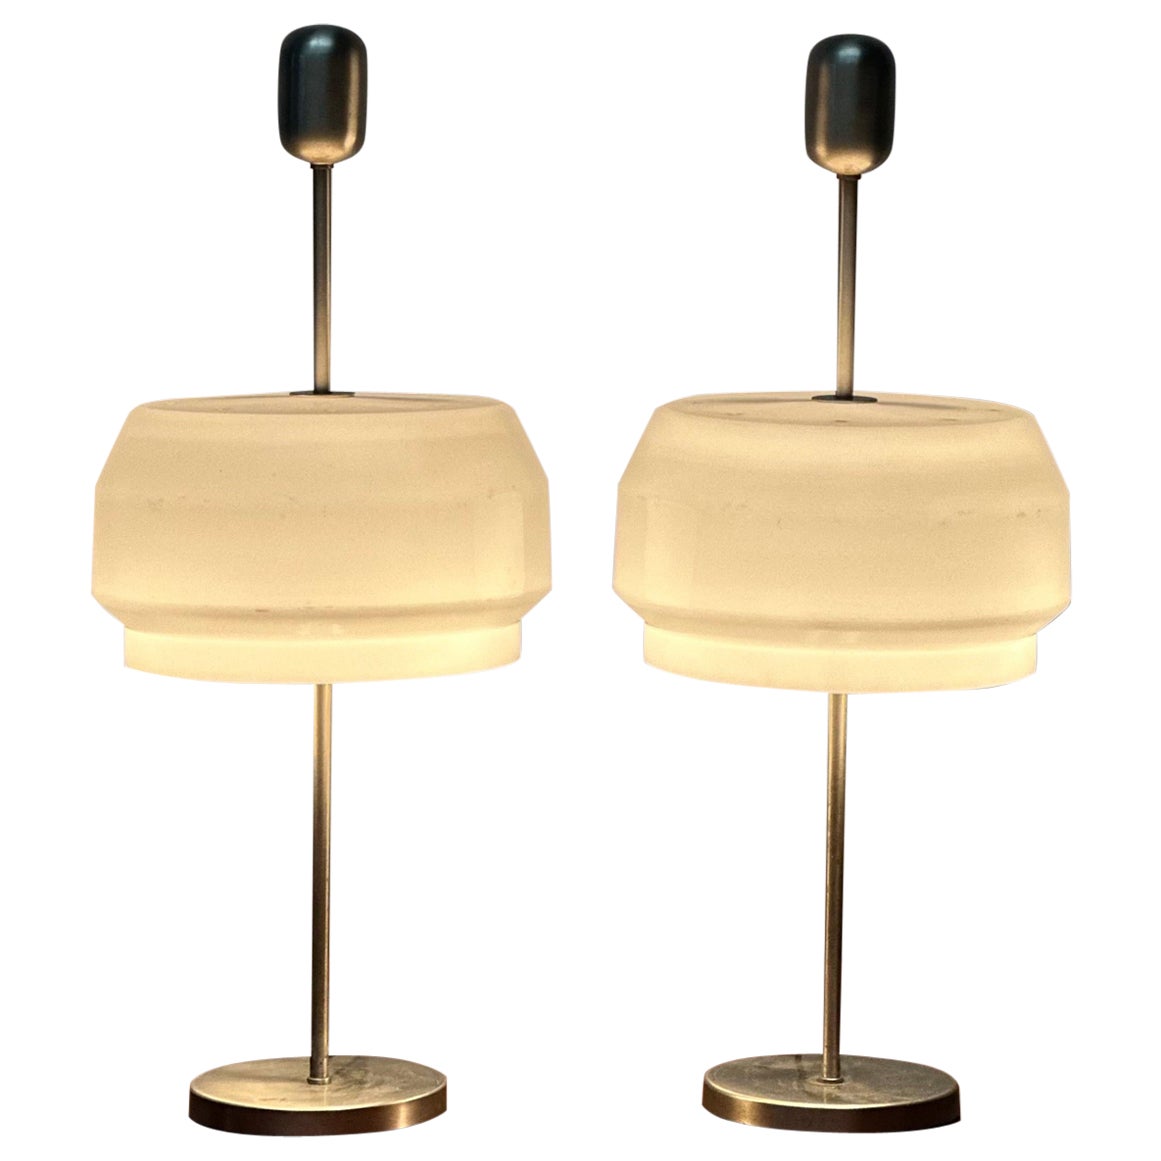 Rare 'KD9' Pair of Table Lamps by Studio GPA Monti for Kartell, 1960s